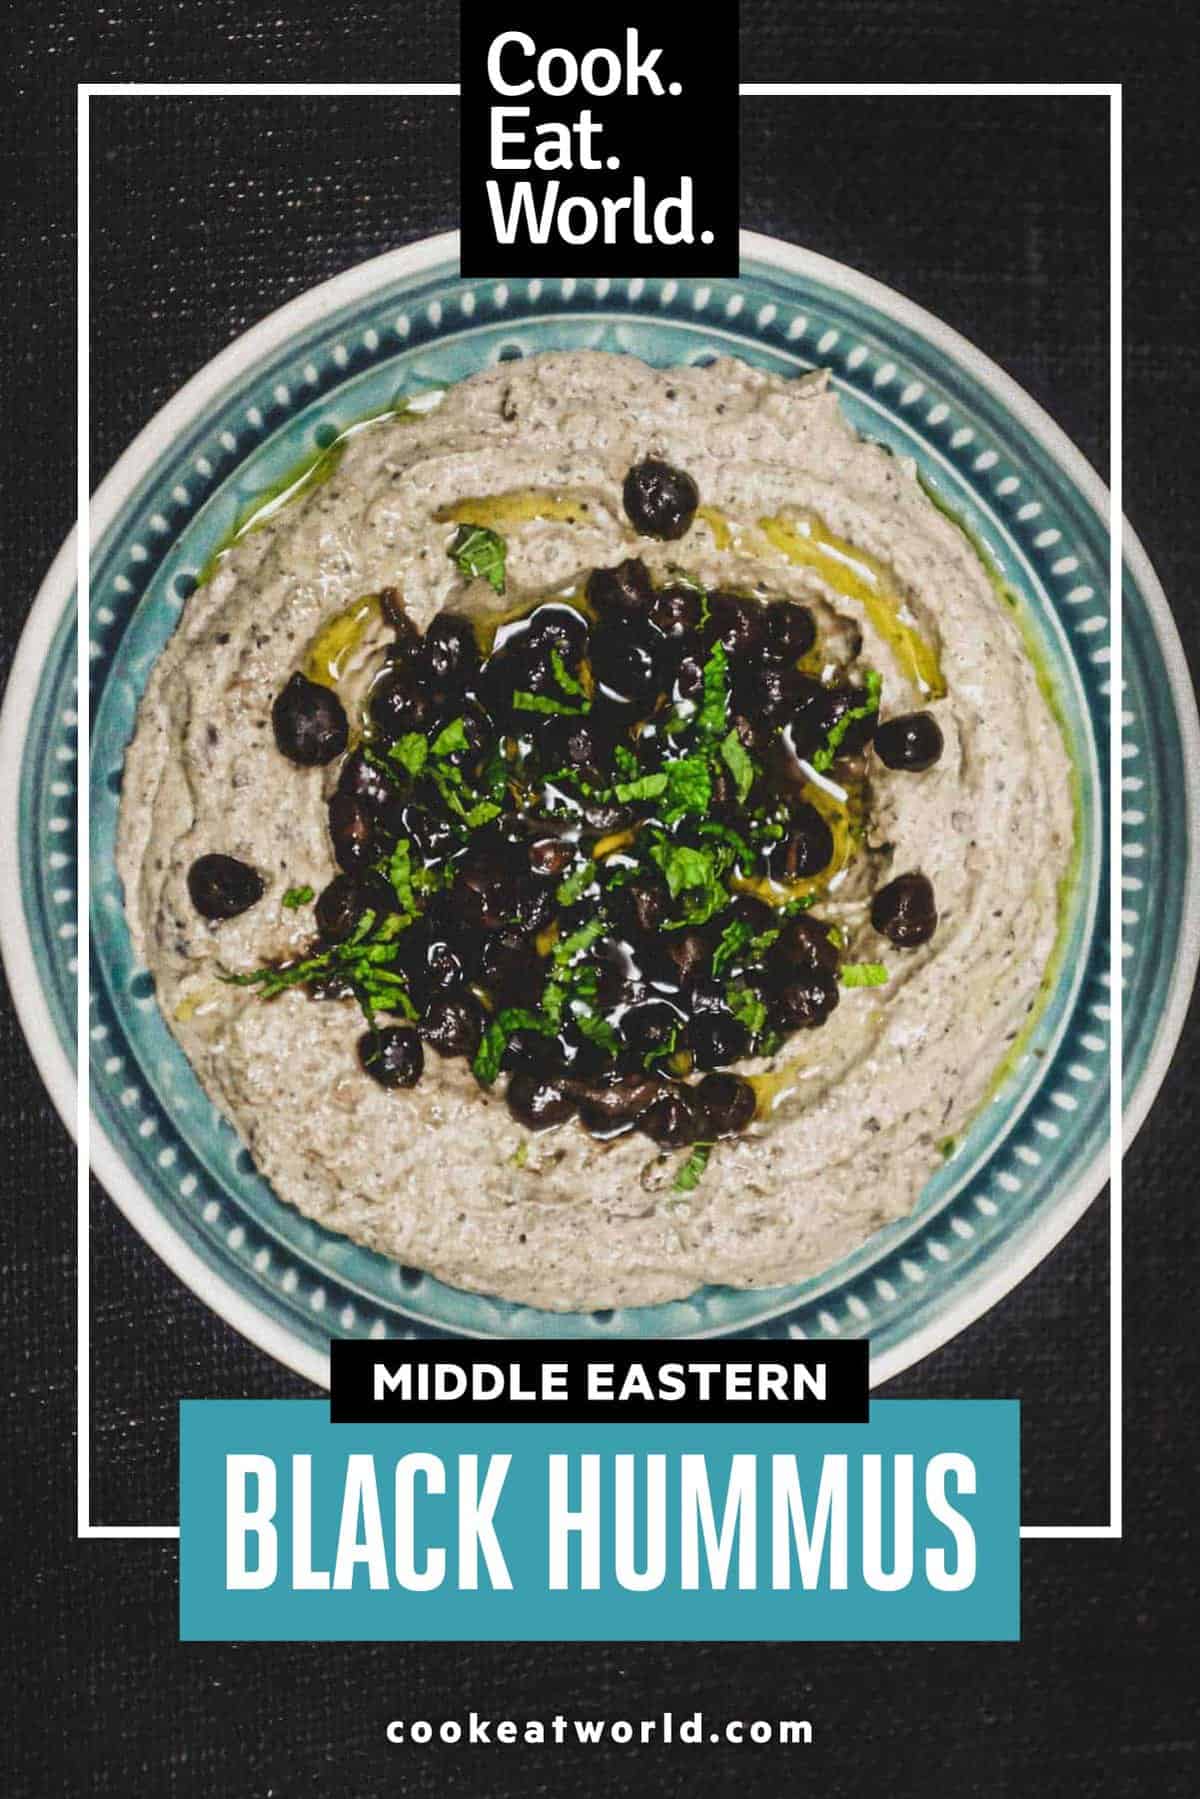 A bowl of black hummus made with black chickpeas